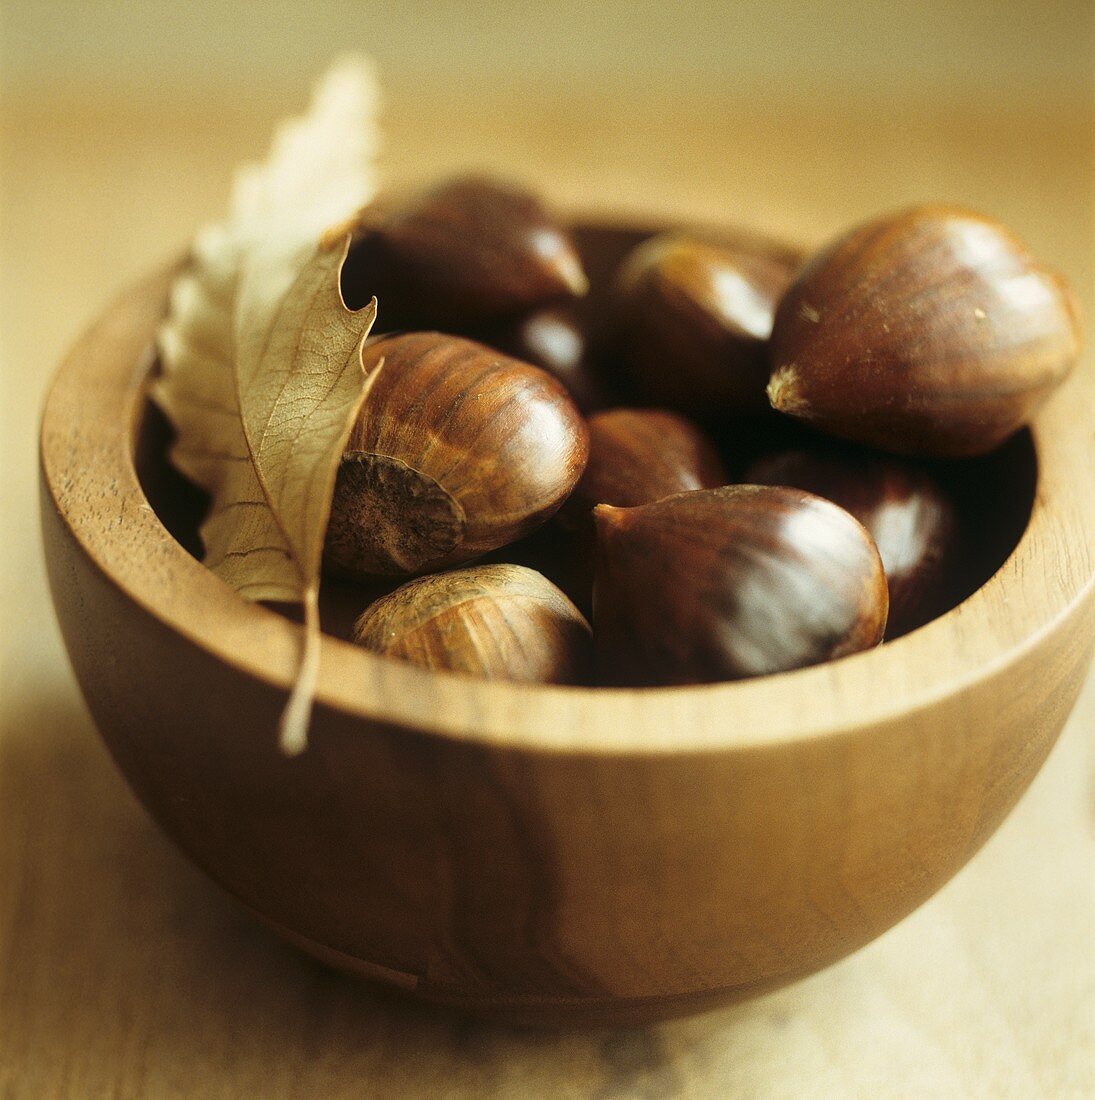 Chestnuts in a wooden bowl